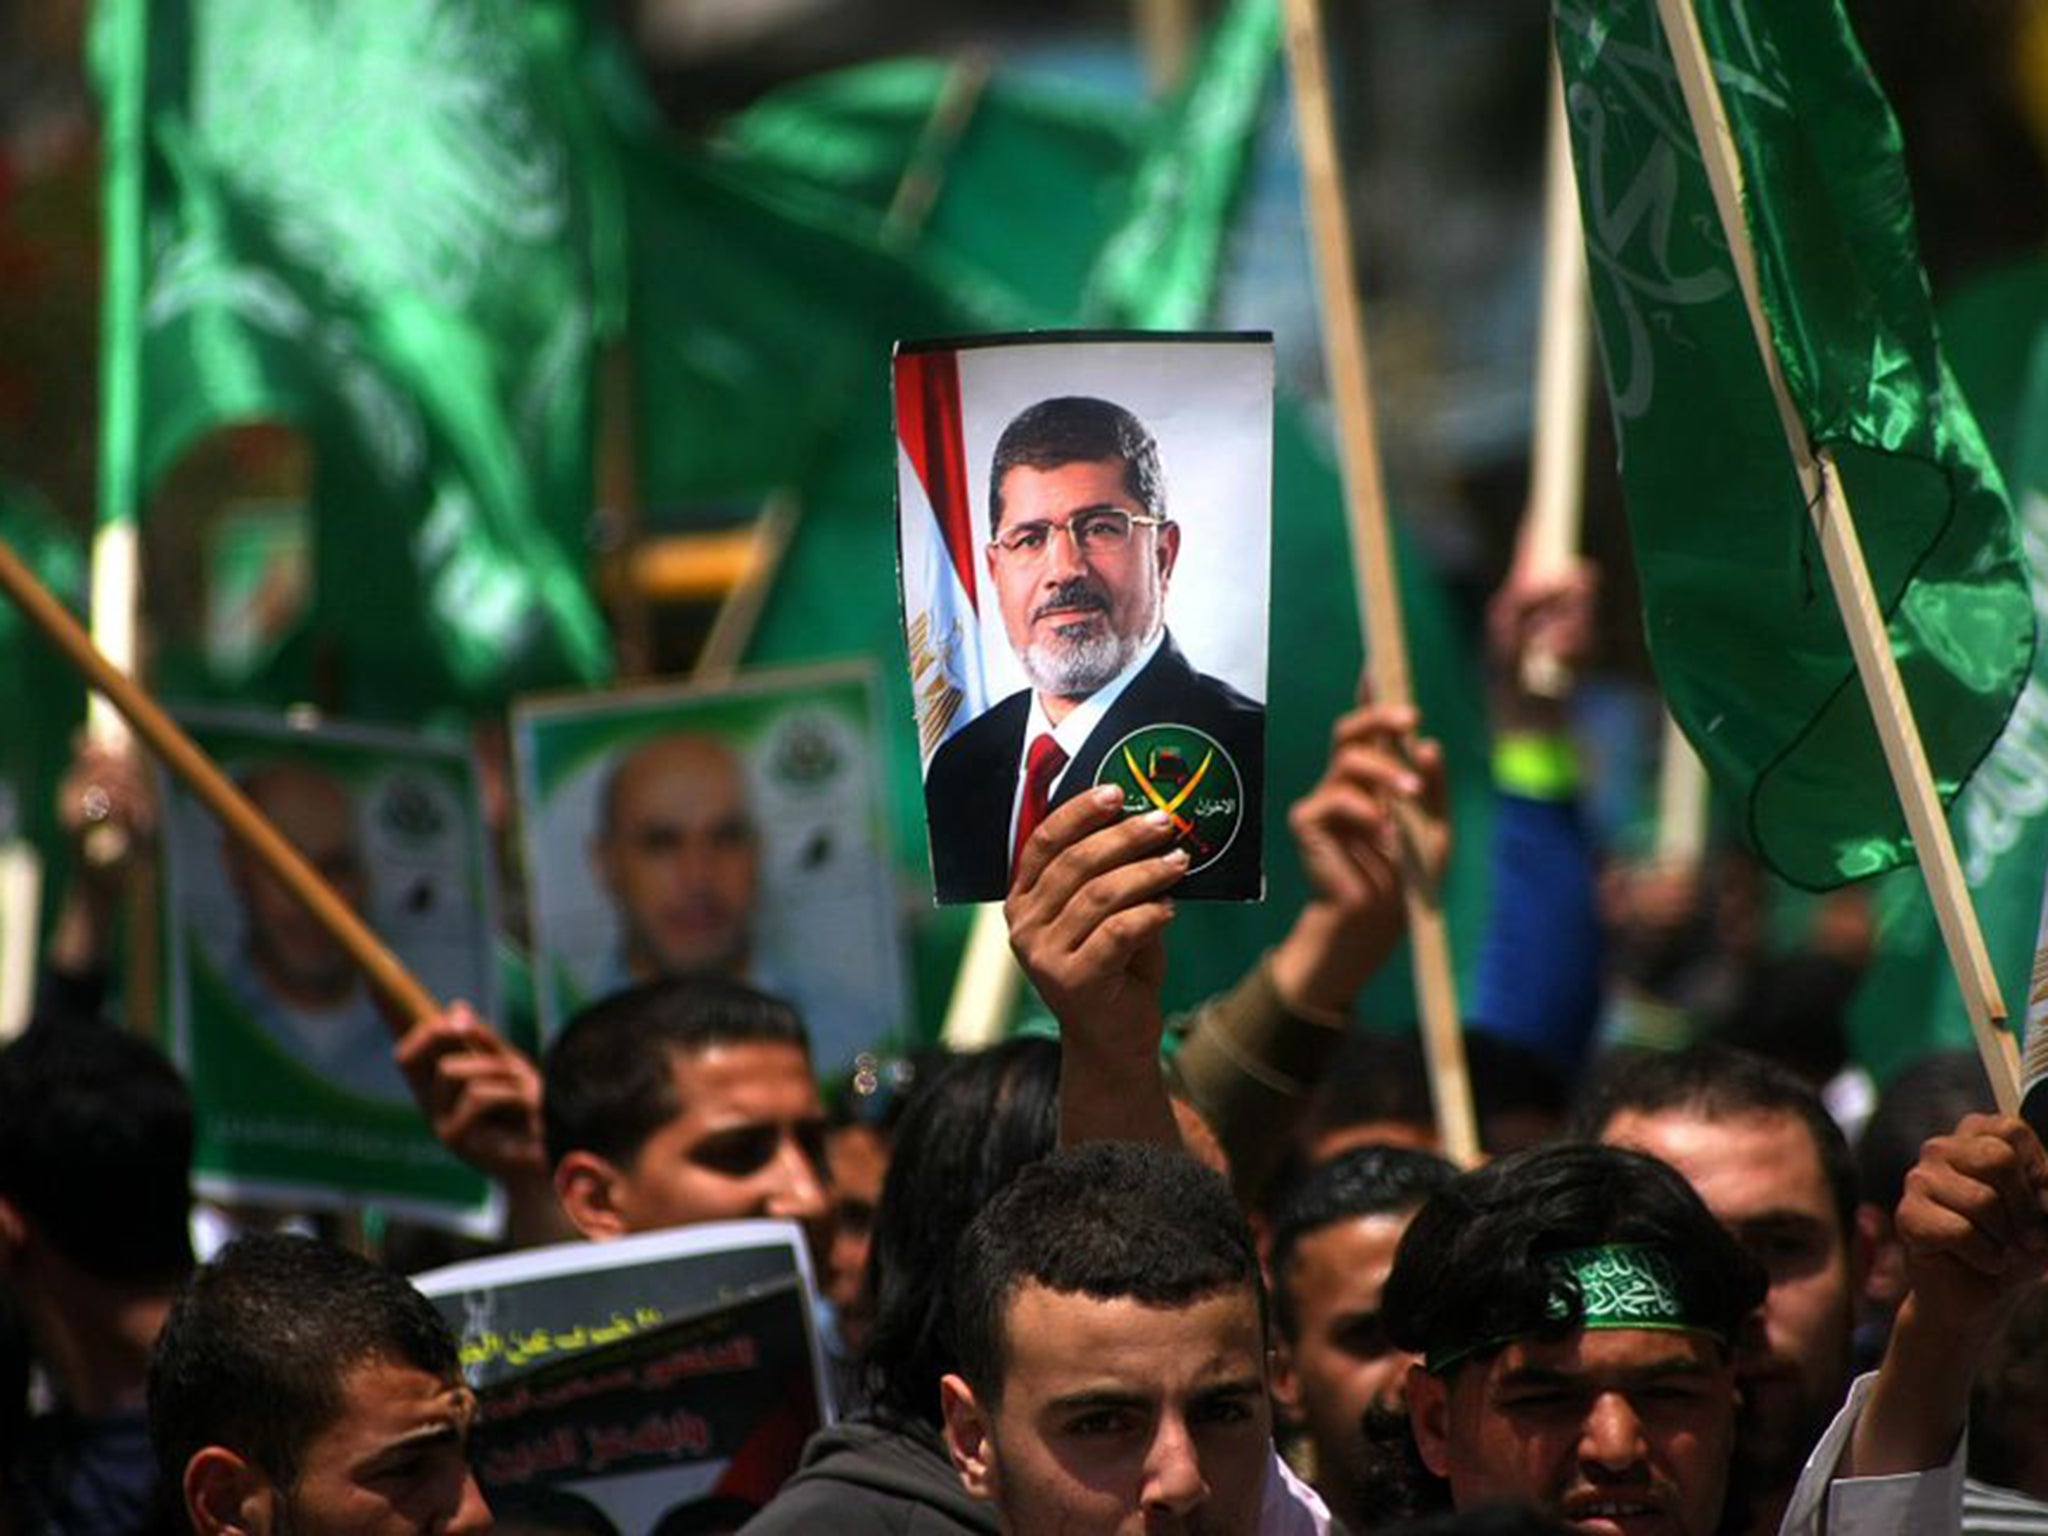 Mohammed Morsi became Egypt’s first freely elected leader, before being ousted by the military in July 2013